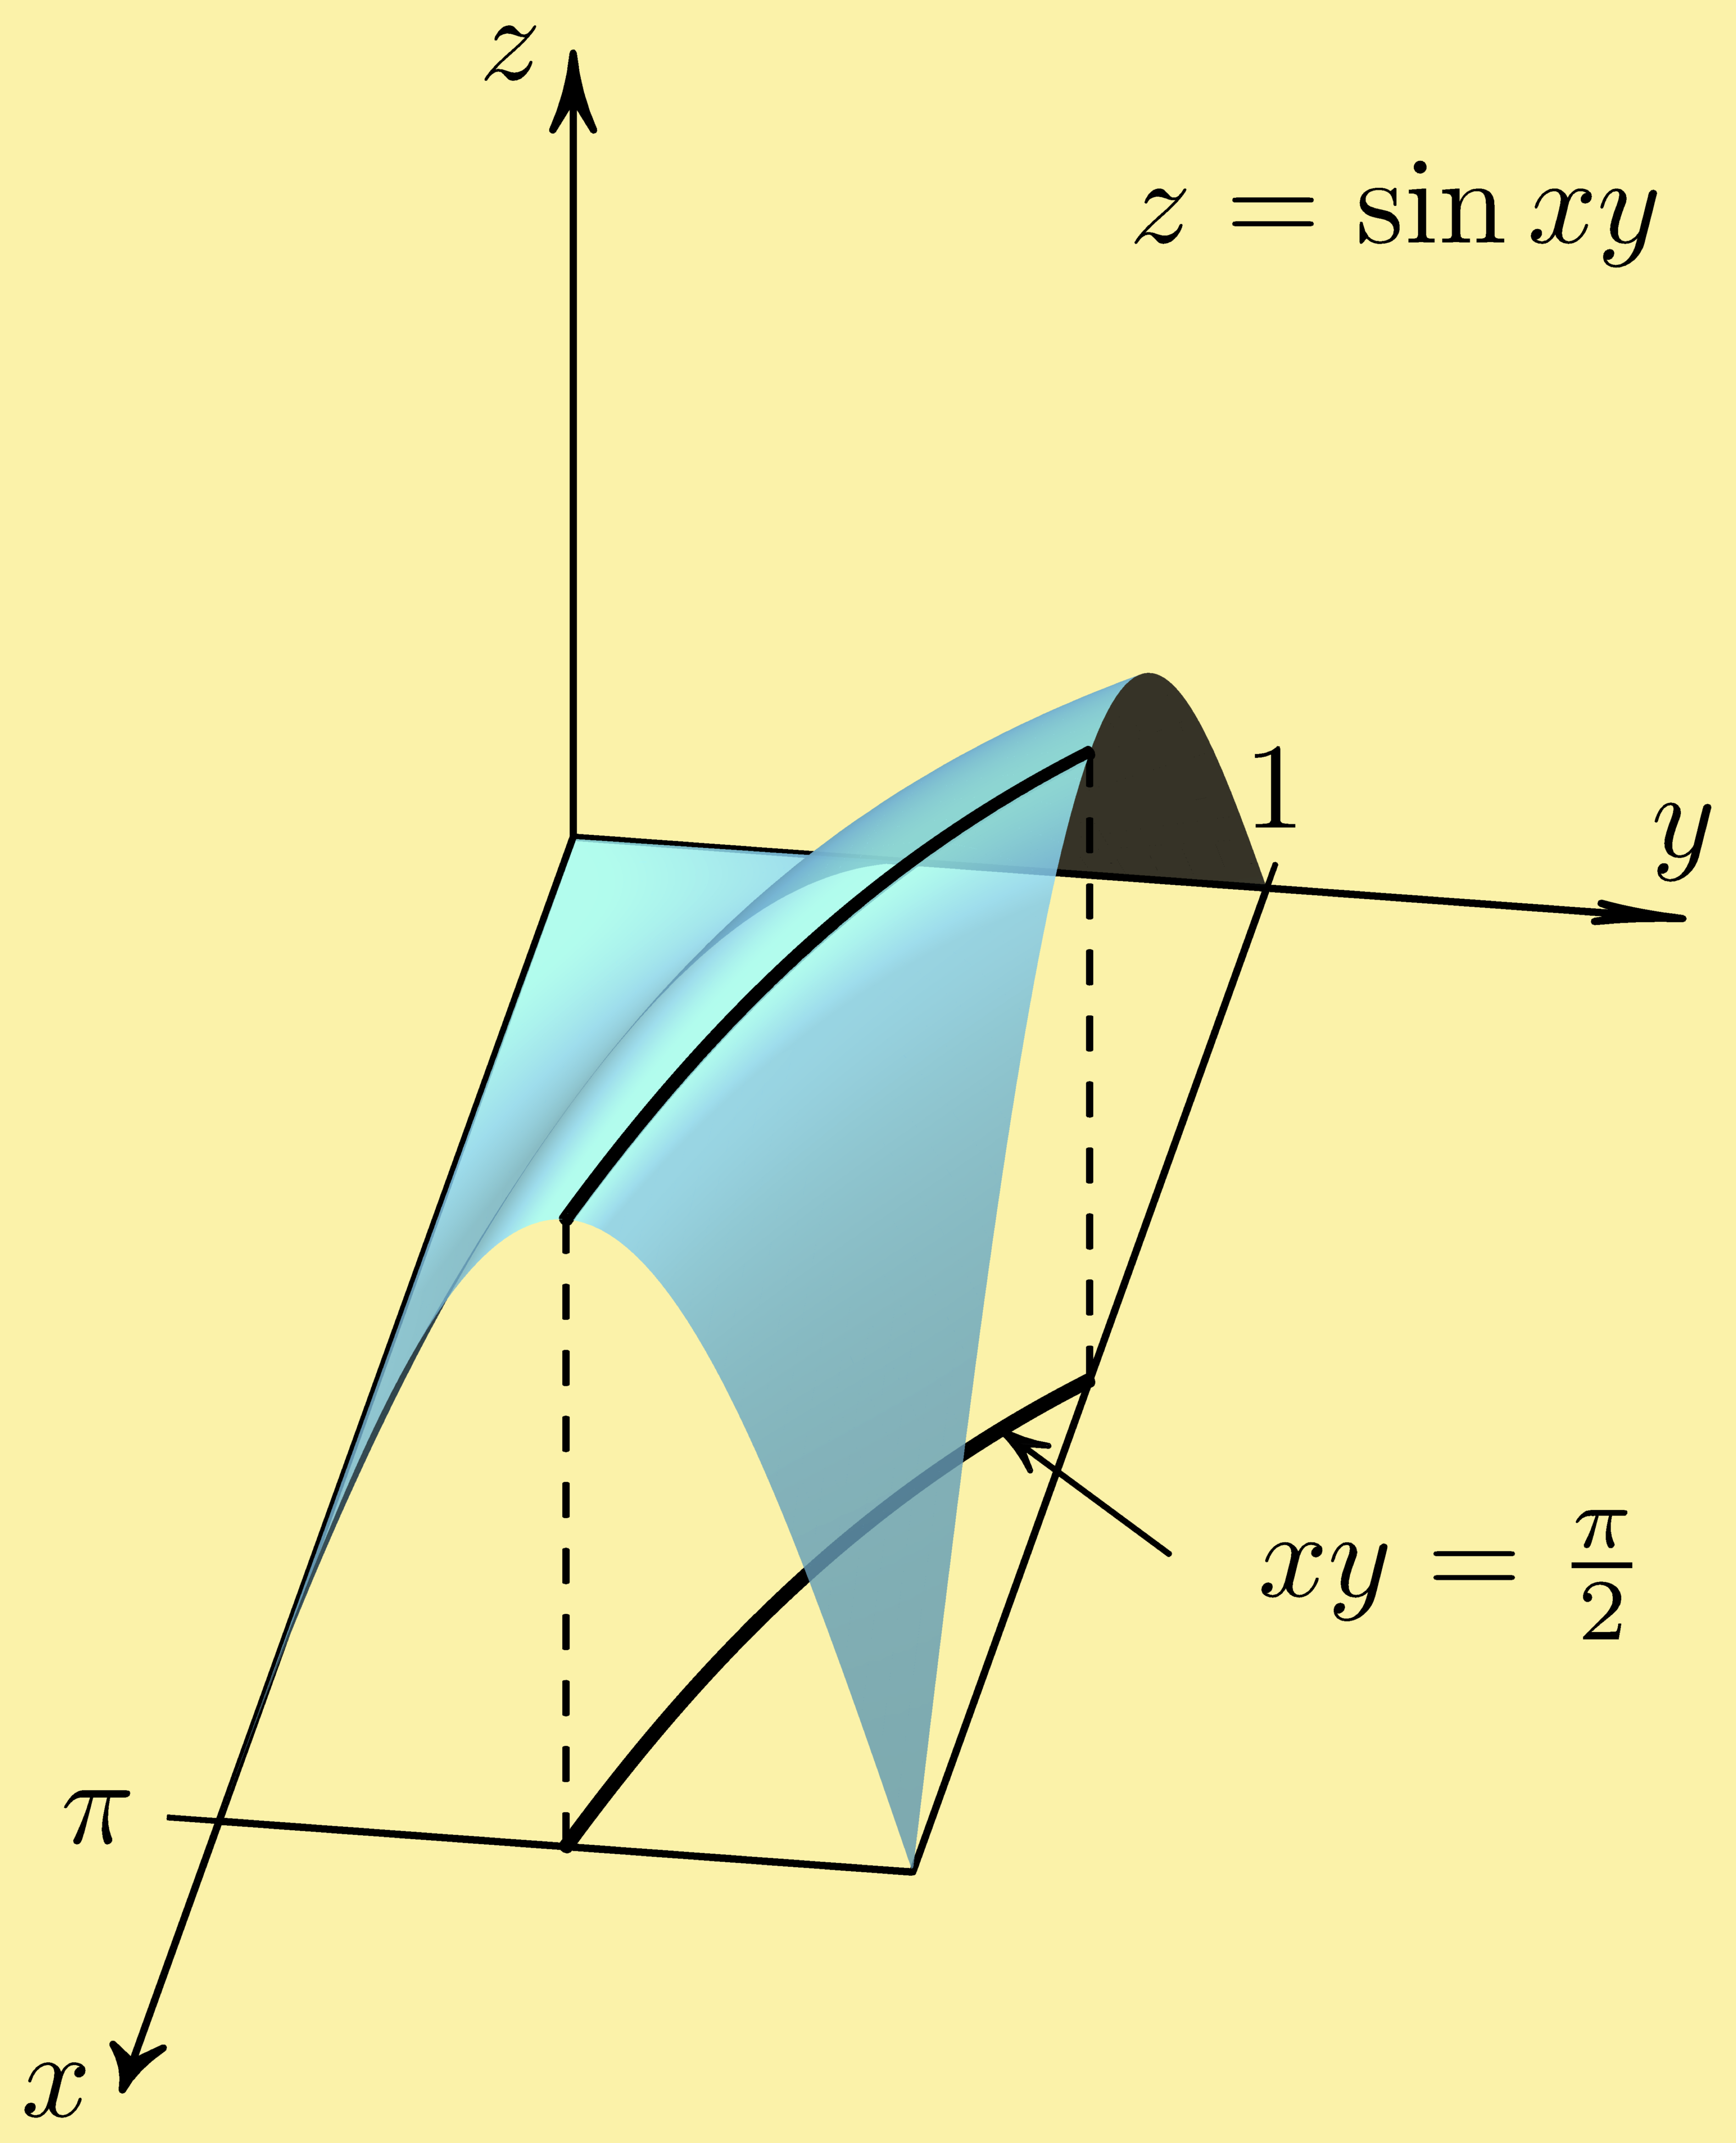 function surface graph extrema 3-space coordinate system xyz R3 Cartesian three-space z=sin(xy)